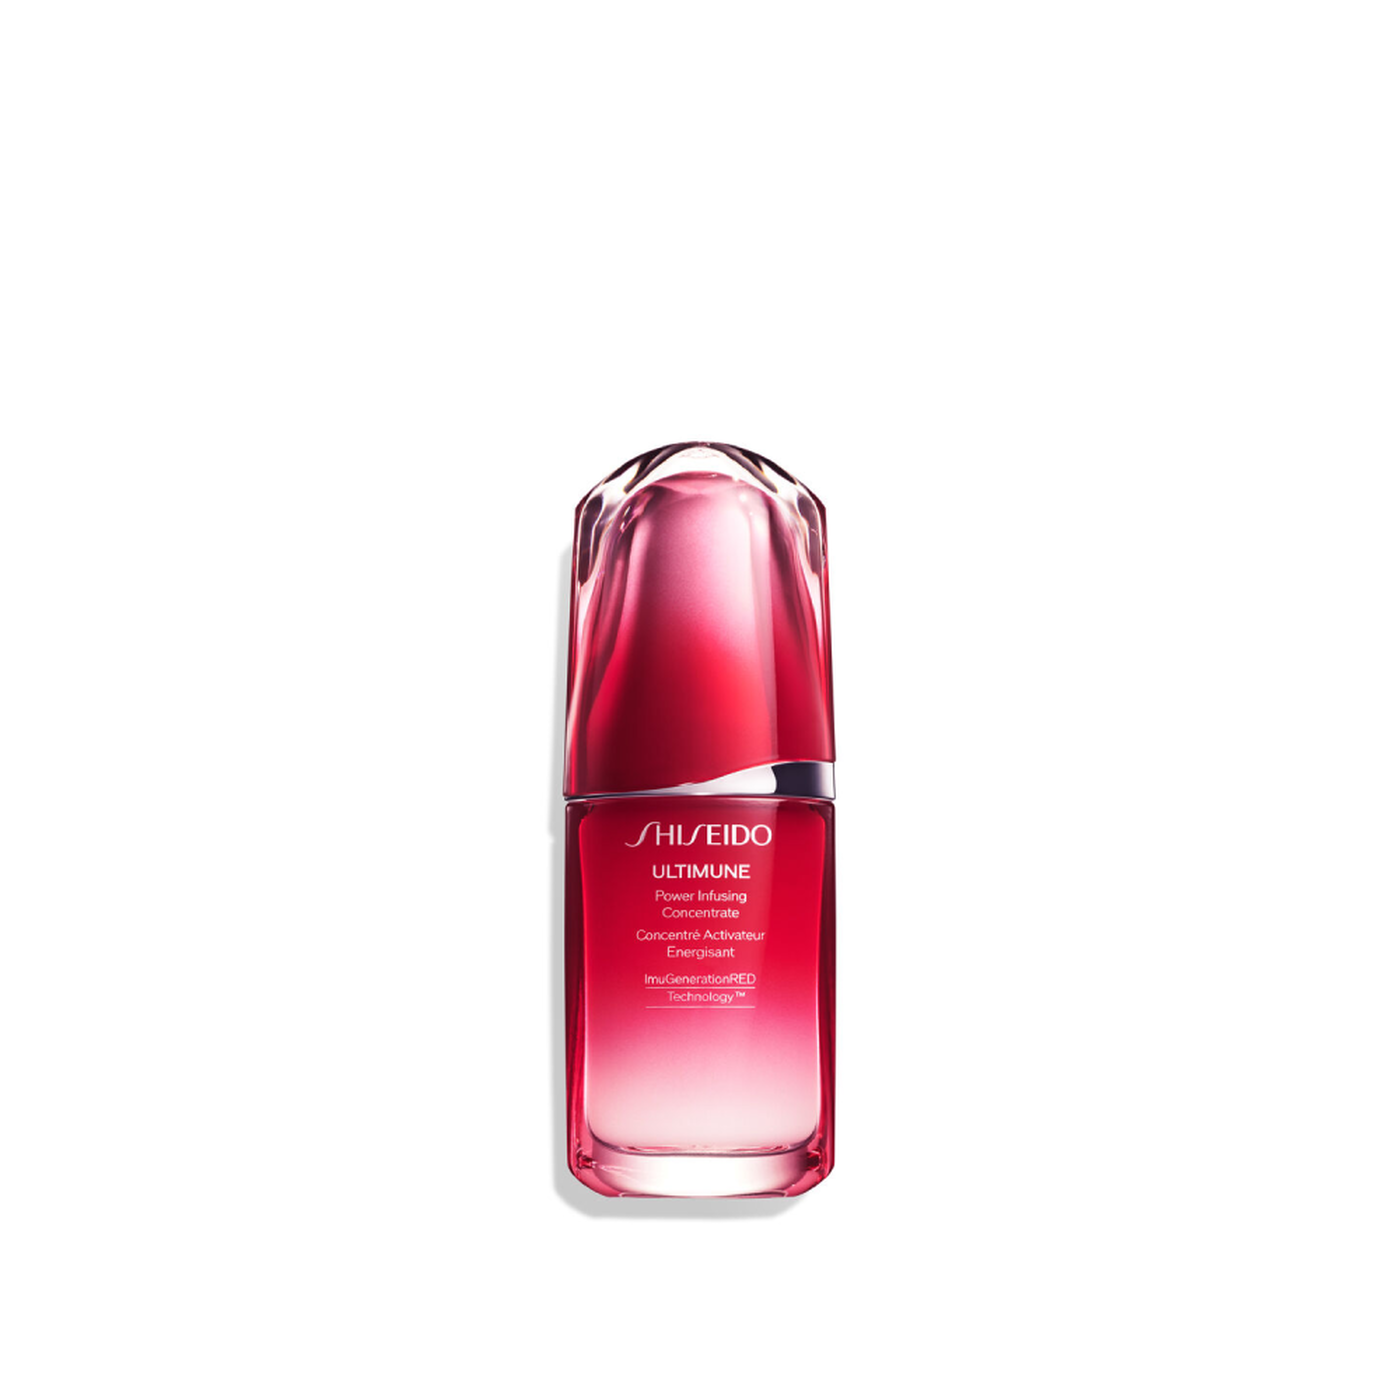 Shiseido Ultimune Power Infusing Concentrate For Women 75Ml Face Serum